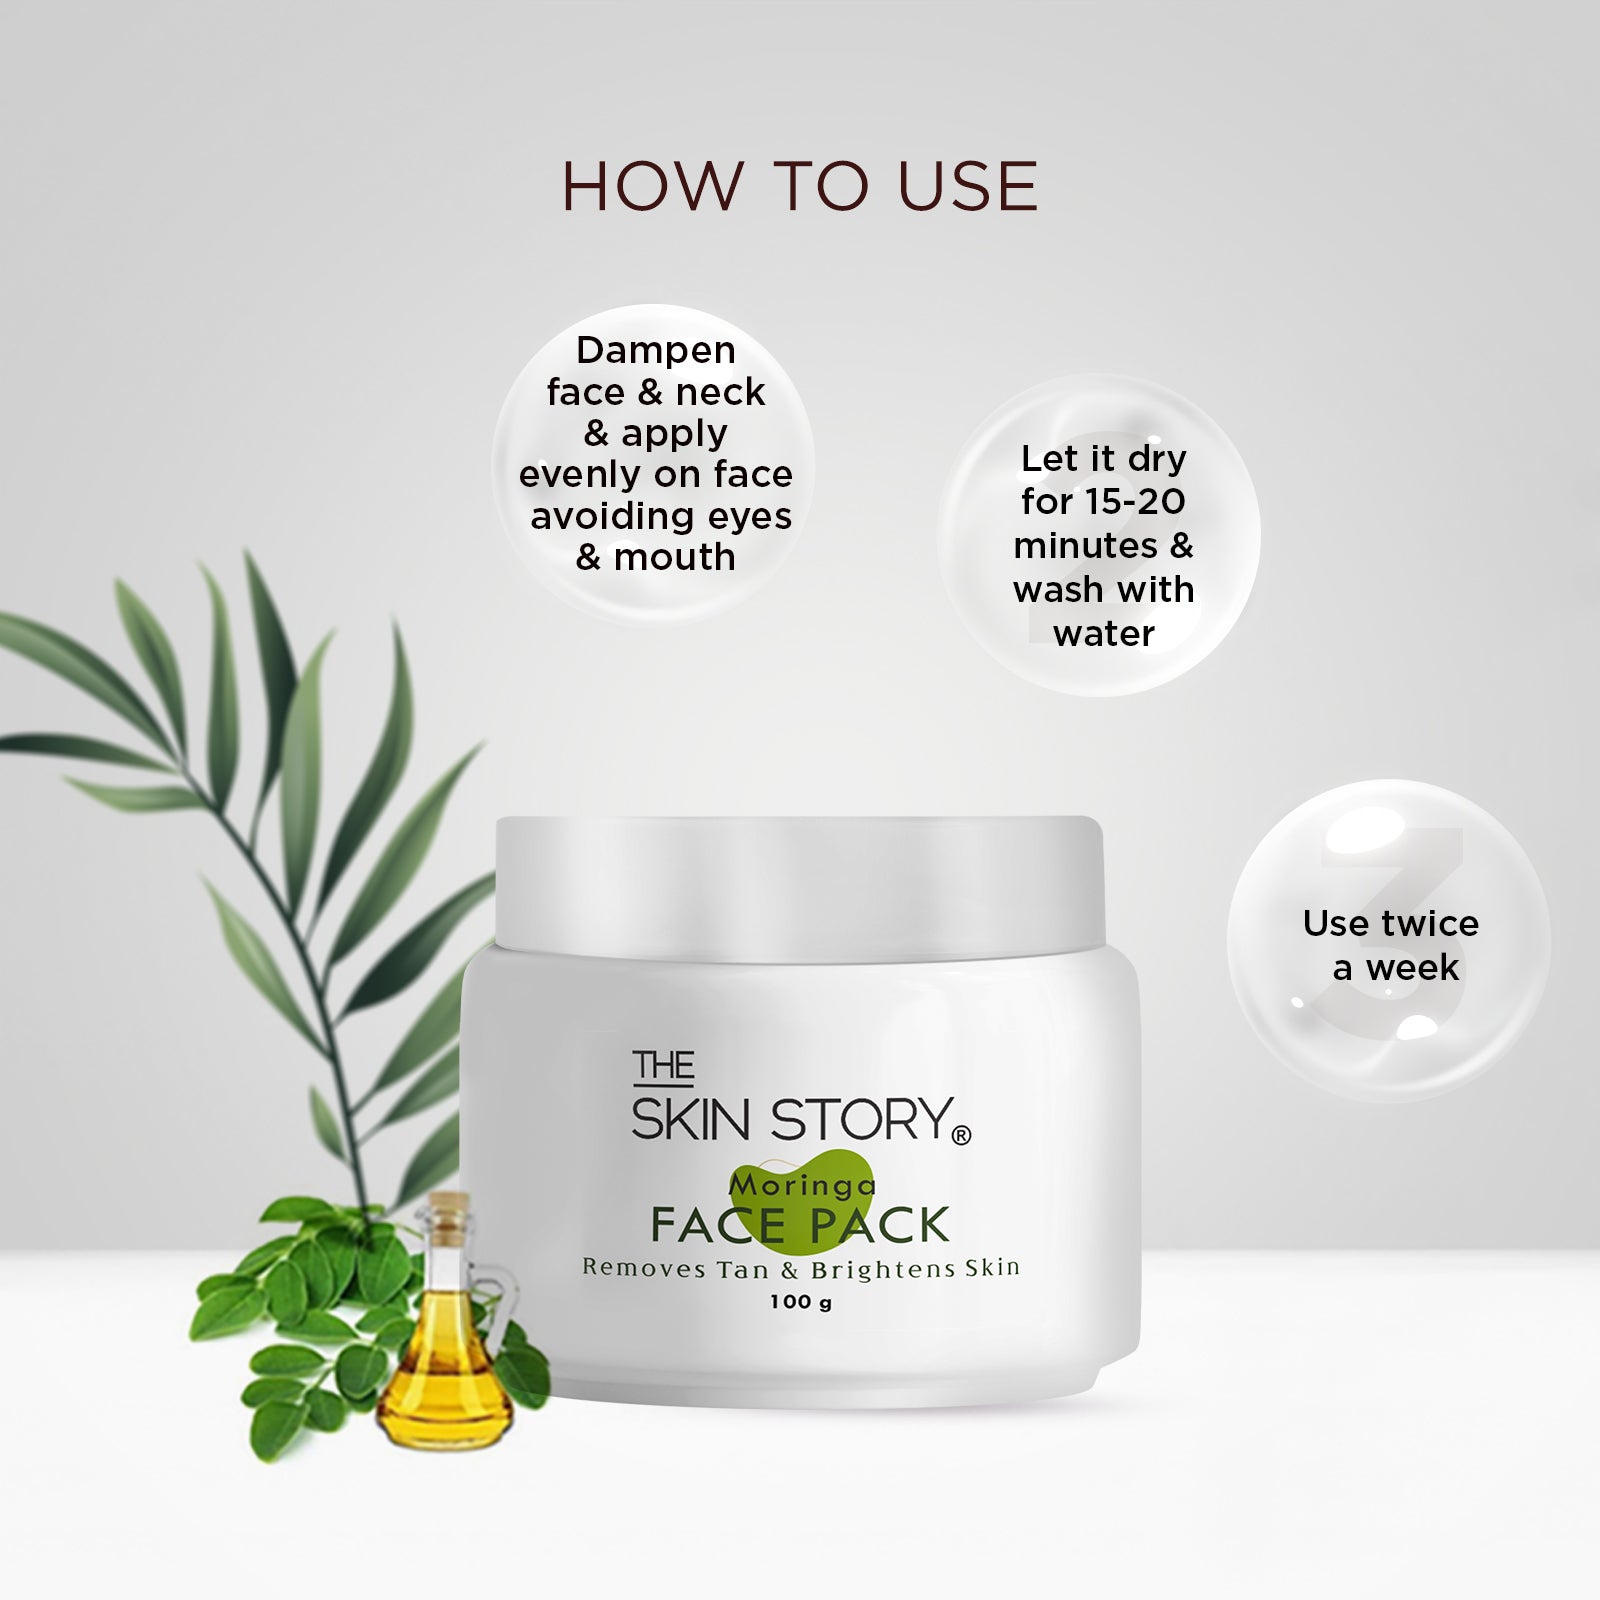 The Skin Story Purifying Face Pack For Glowing Skin| Clear Skin | Tan Removal Care | Normal to Oily Skin | Moringa & Vitamin E | 100g